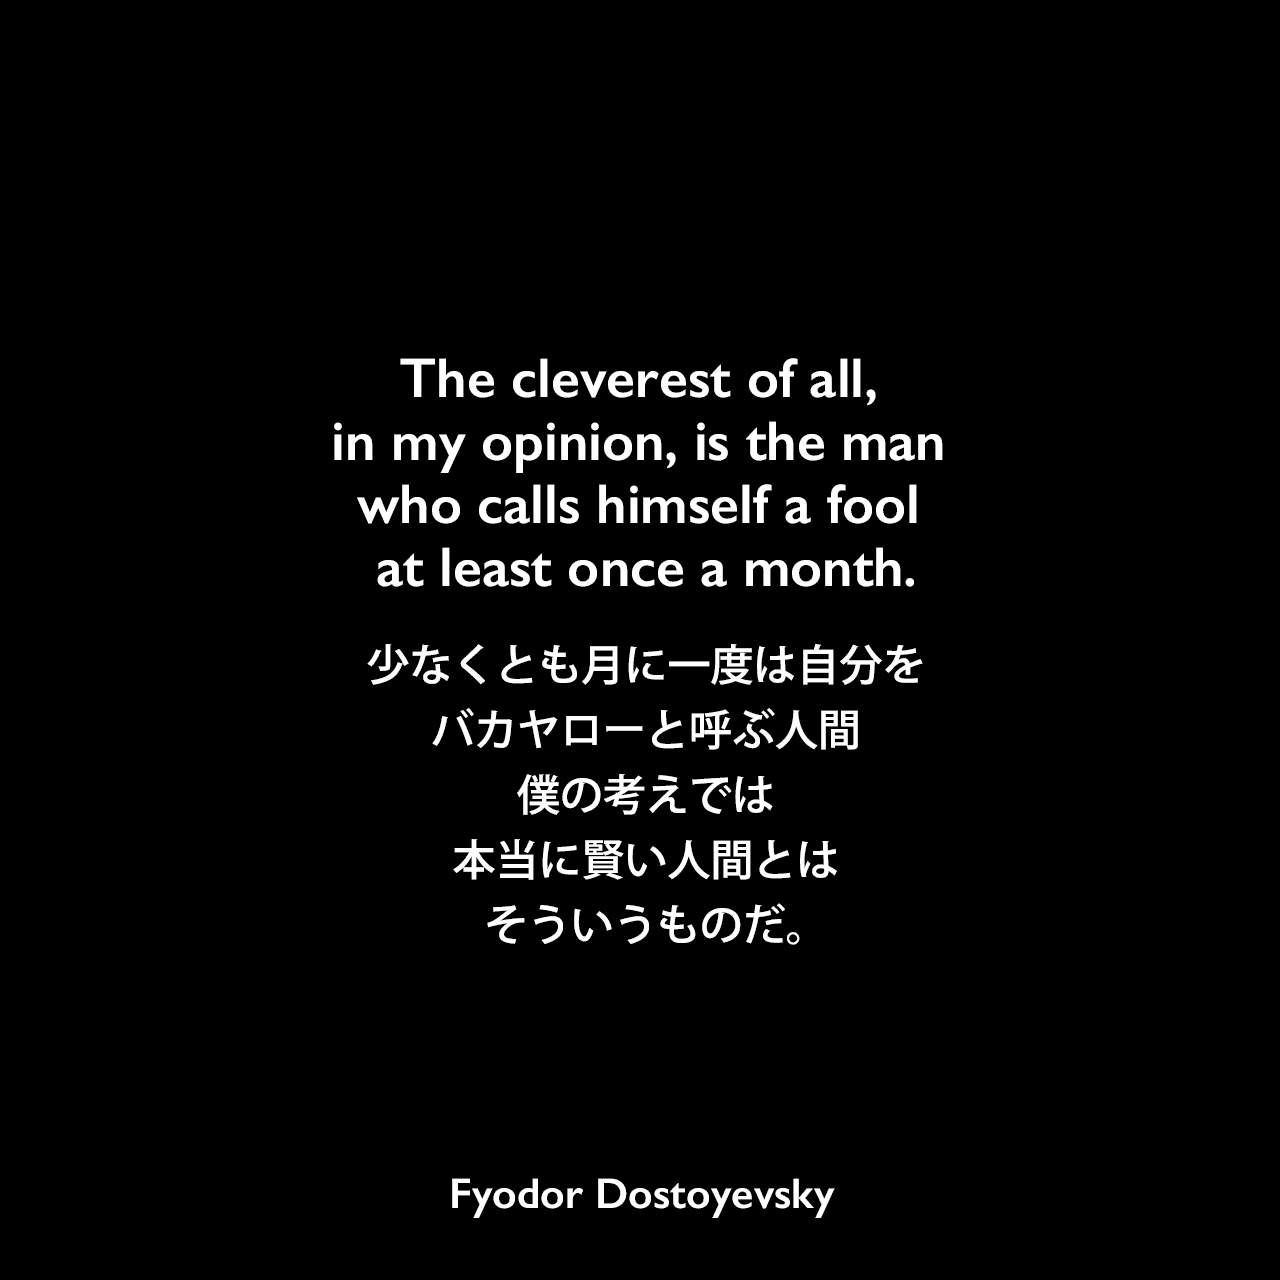 The cleverest of all, in my opinion, is the man who calls himself a fool at least once a month.少なくとも月に一度は自分をバカヤローと呼ぶ人間、僕の考えでは、本当に賢い人間とはそういうものだ。Fyodor Dostoyevsky